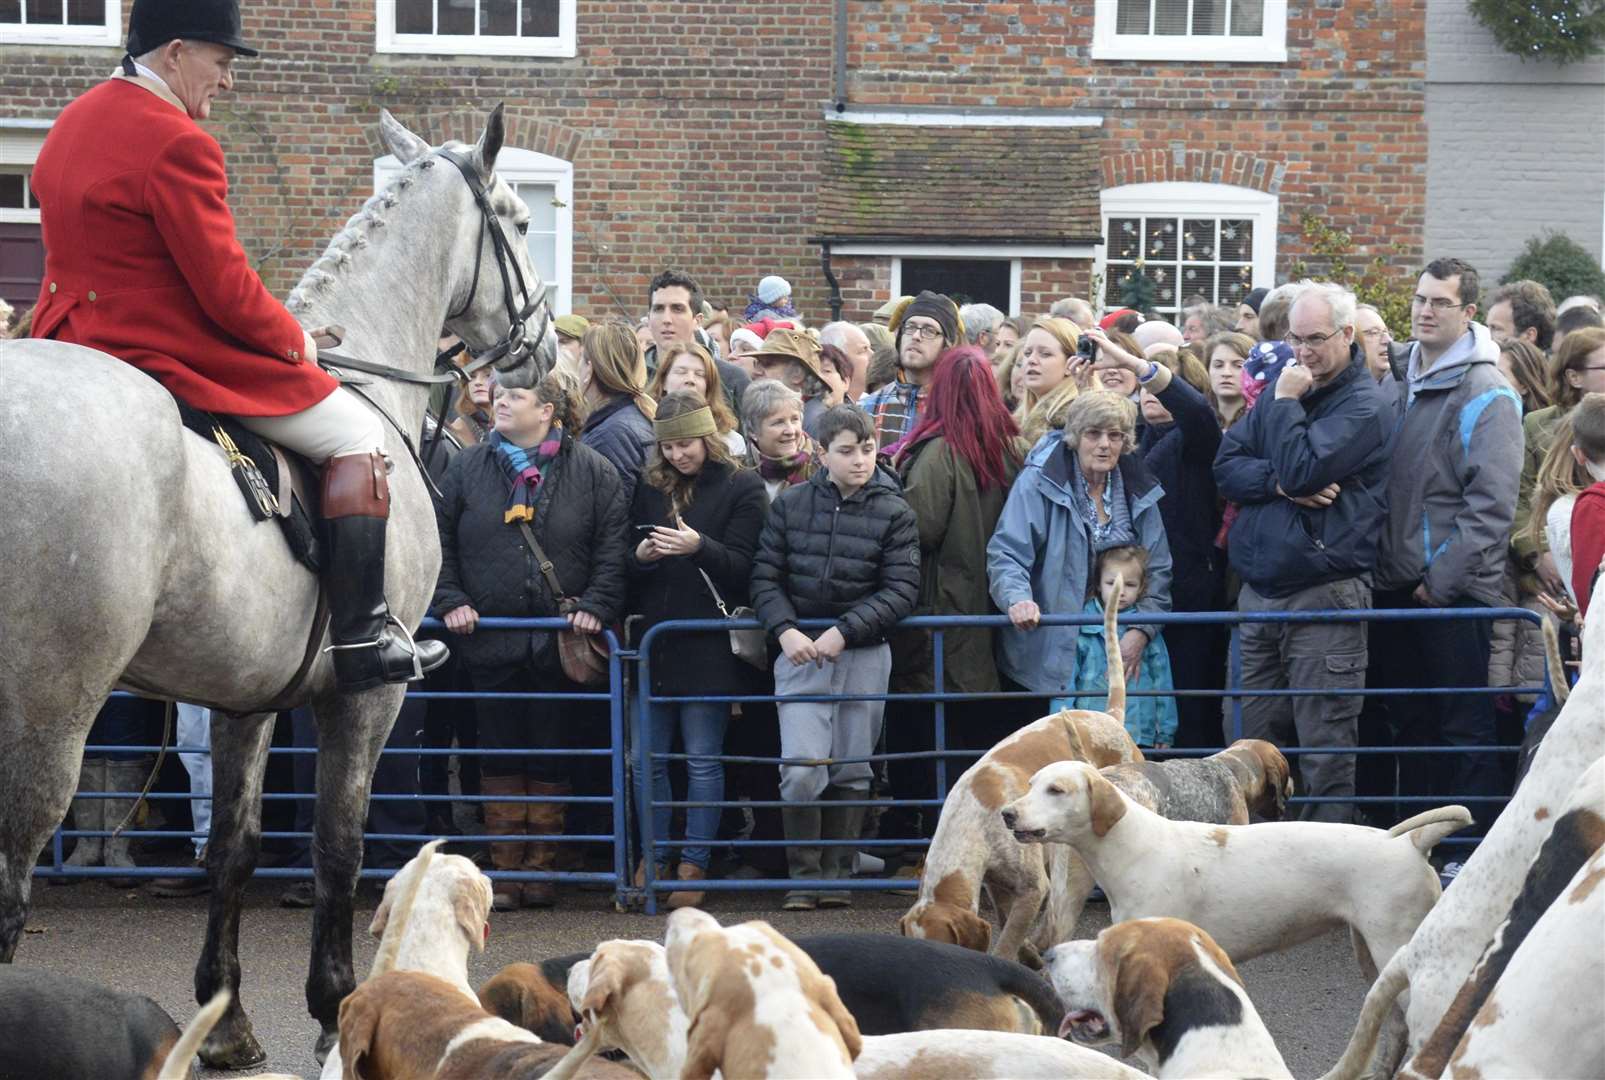 The scene in Elham village square at a meet of the hunt